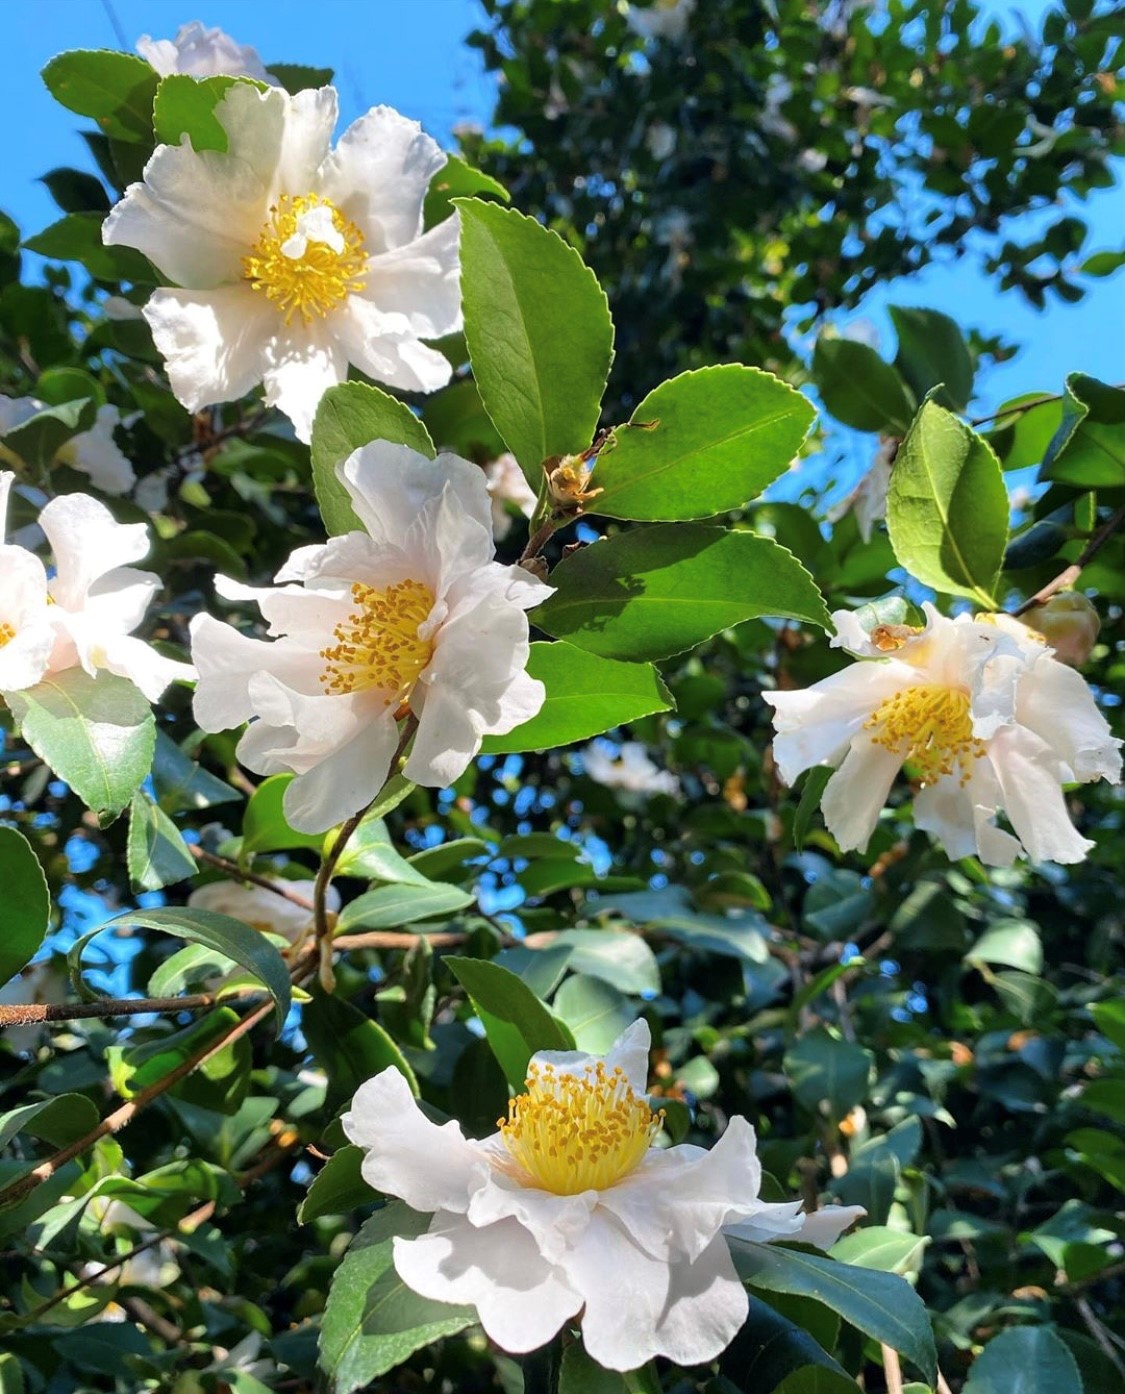 White Camellia flowers with a yellow center and green leaves.